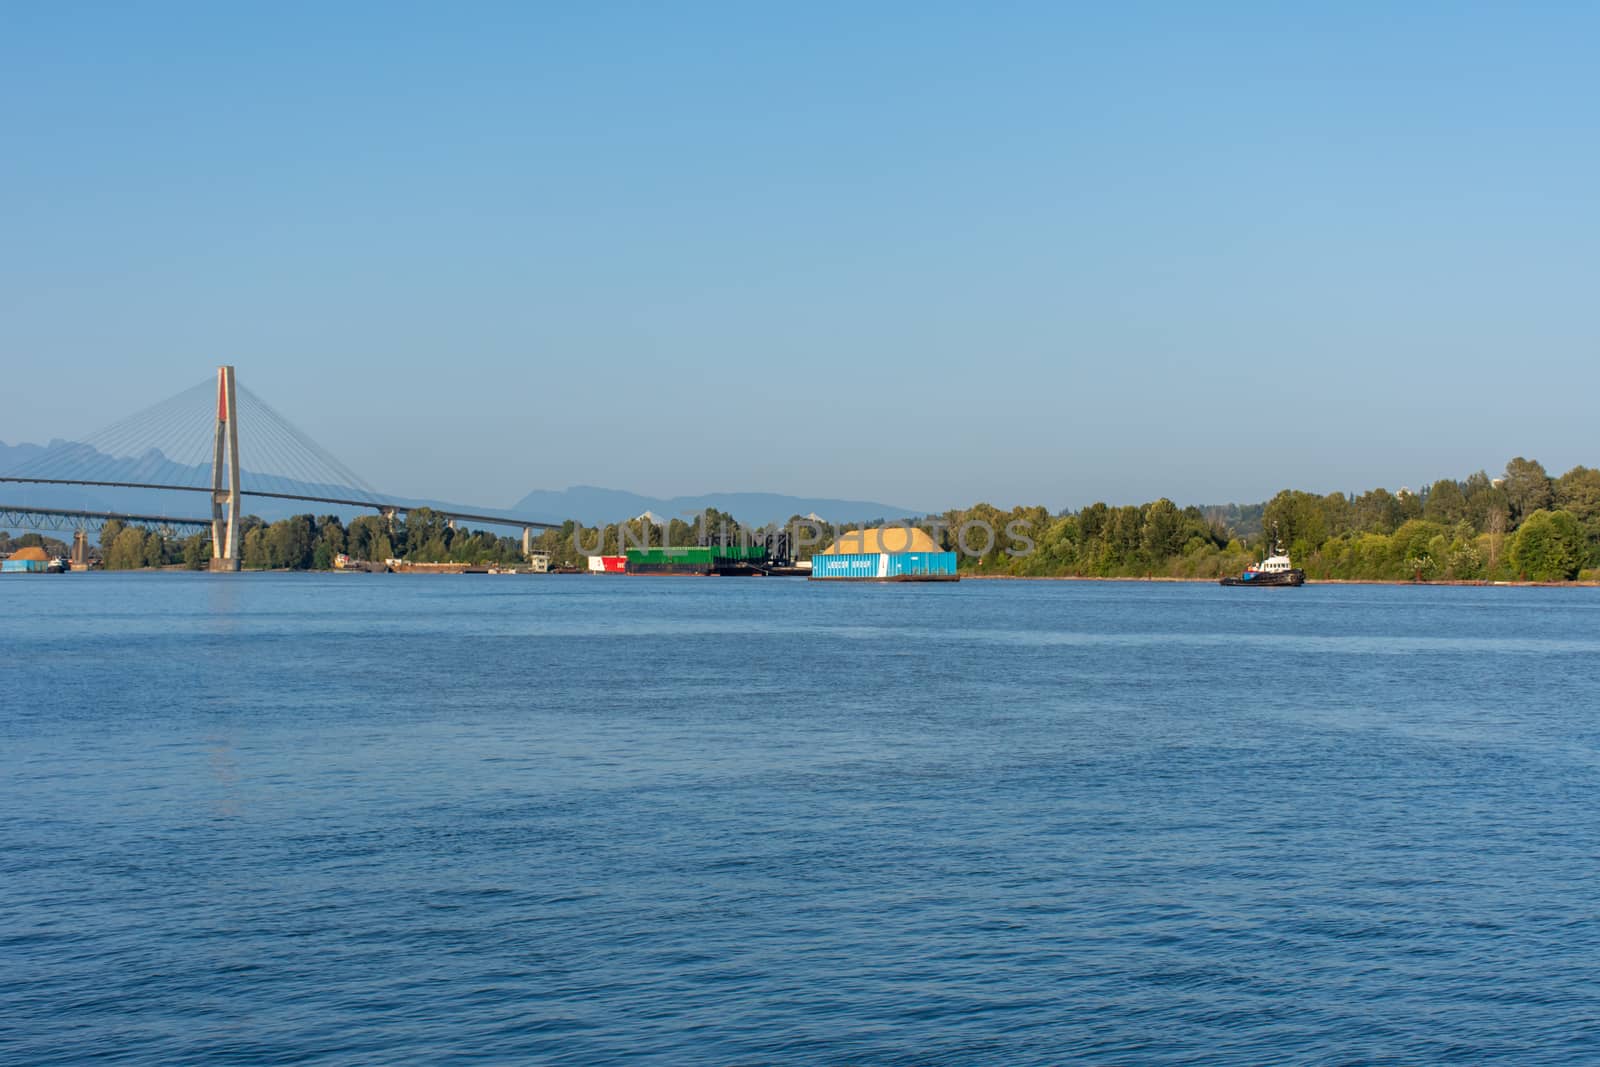 "New Westminster, BC/Canada - 8/3/2019: A Tugboat pulling a Ledcor Group barge in New Westminster, British Columbia, Canada looking from the Quay in the Fraser River, Skytrain Bridge into Surrey."